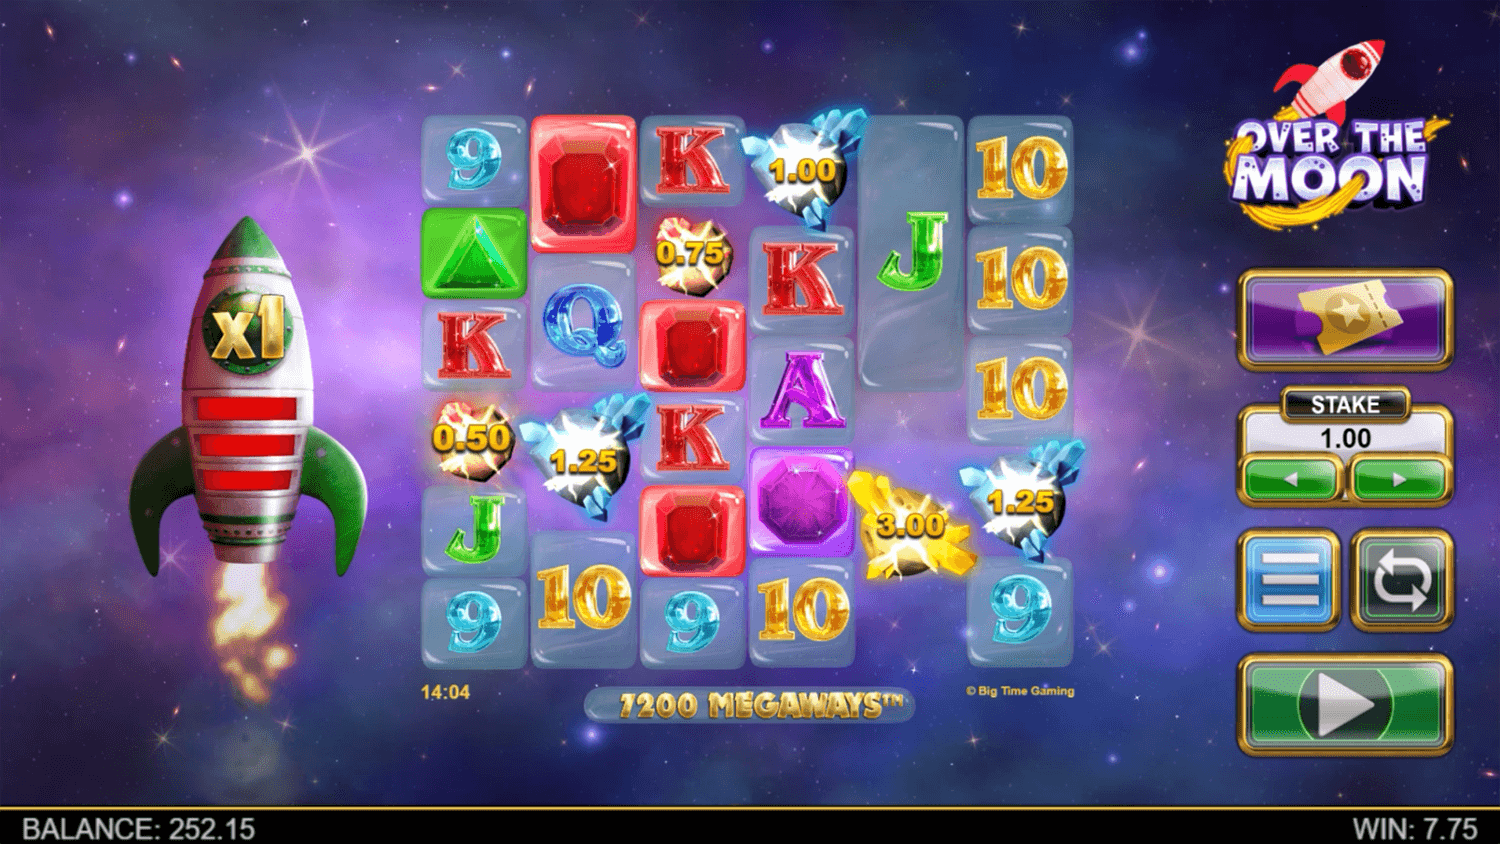 Over The Moon slot game